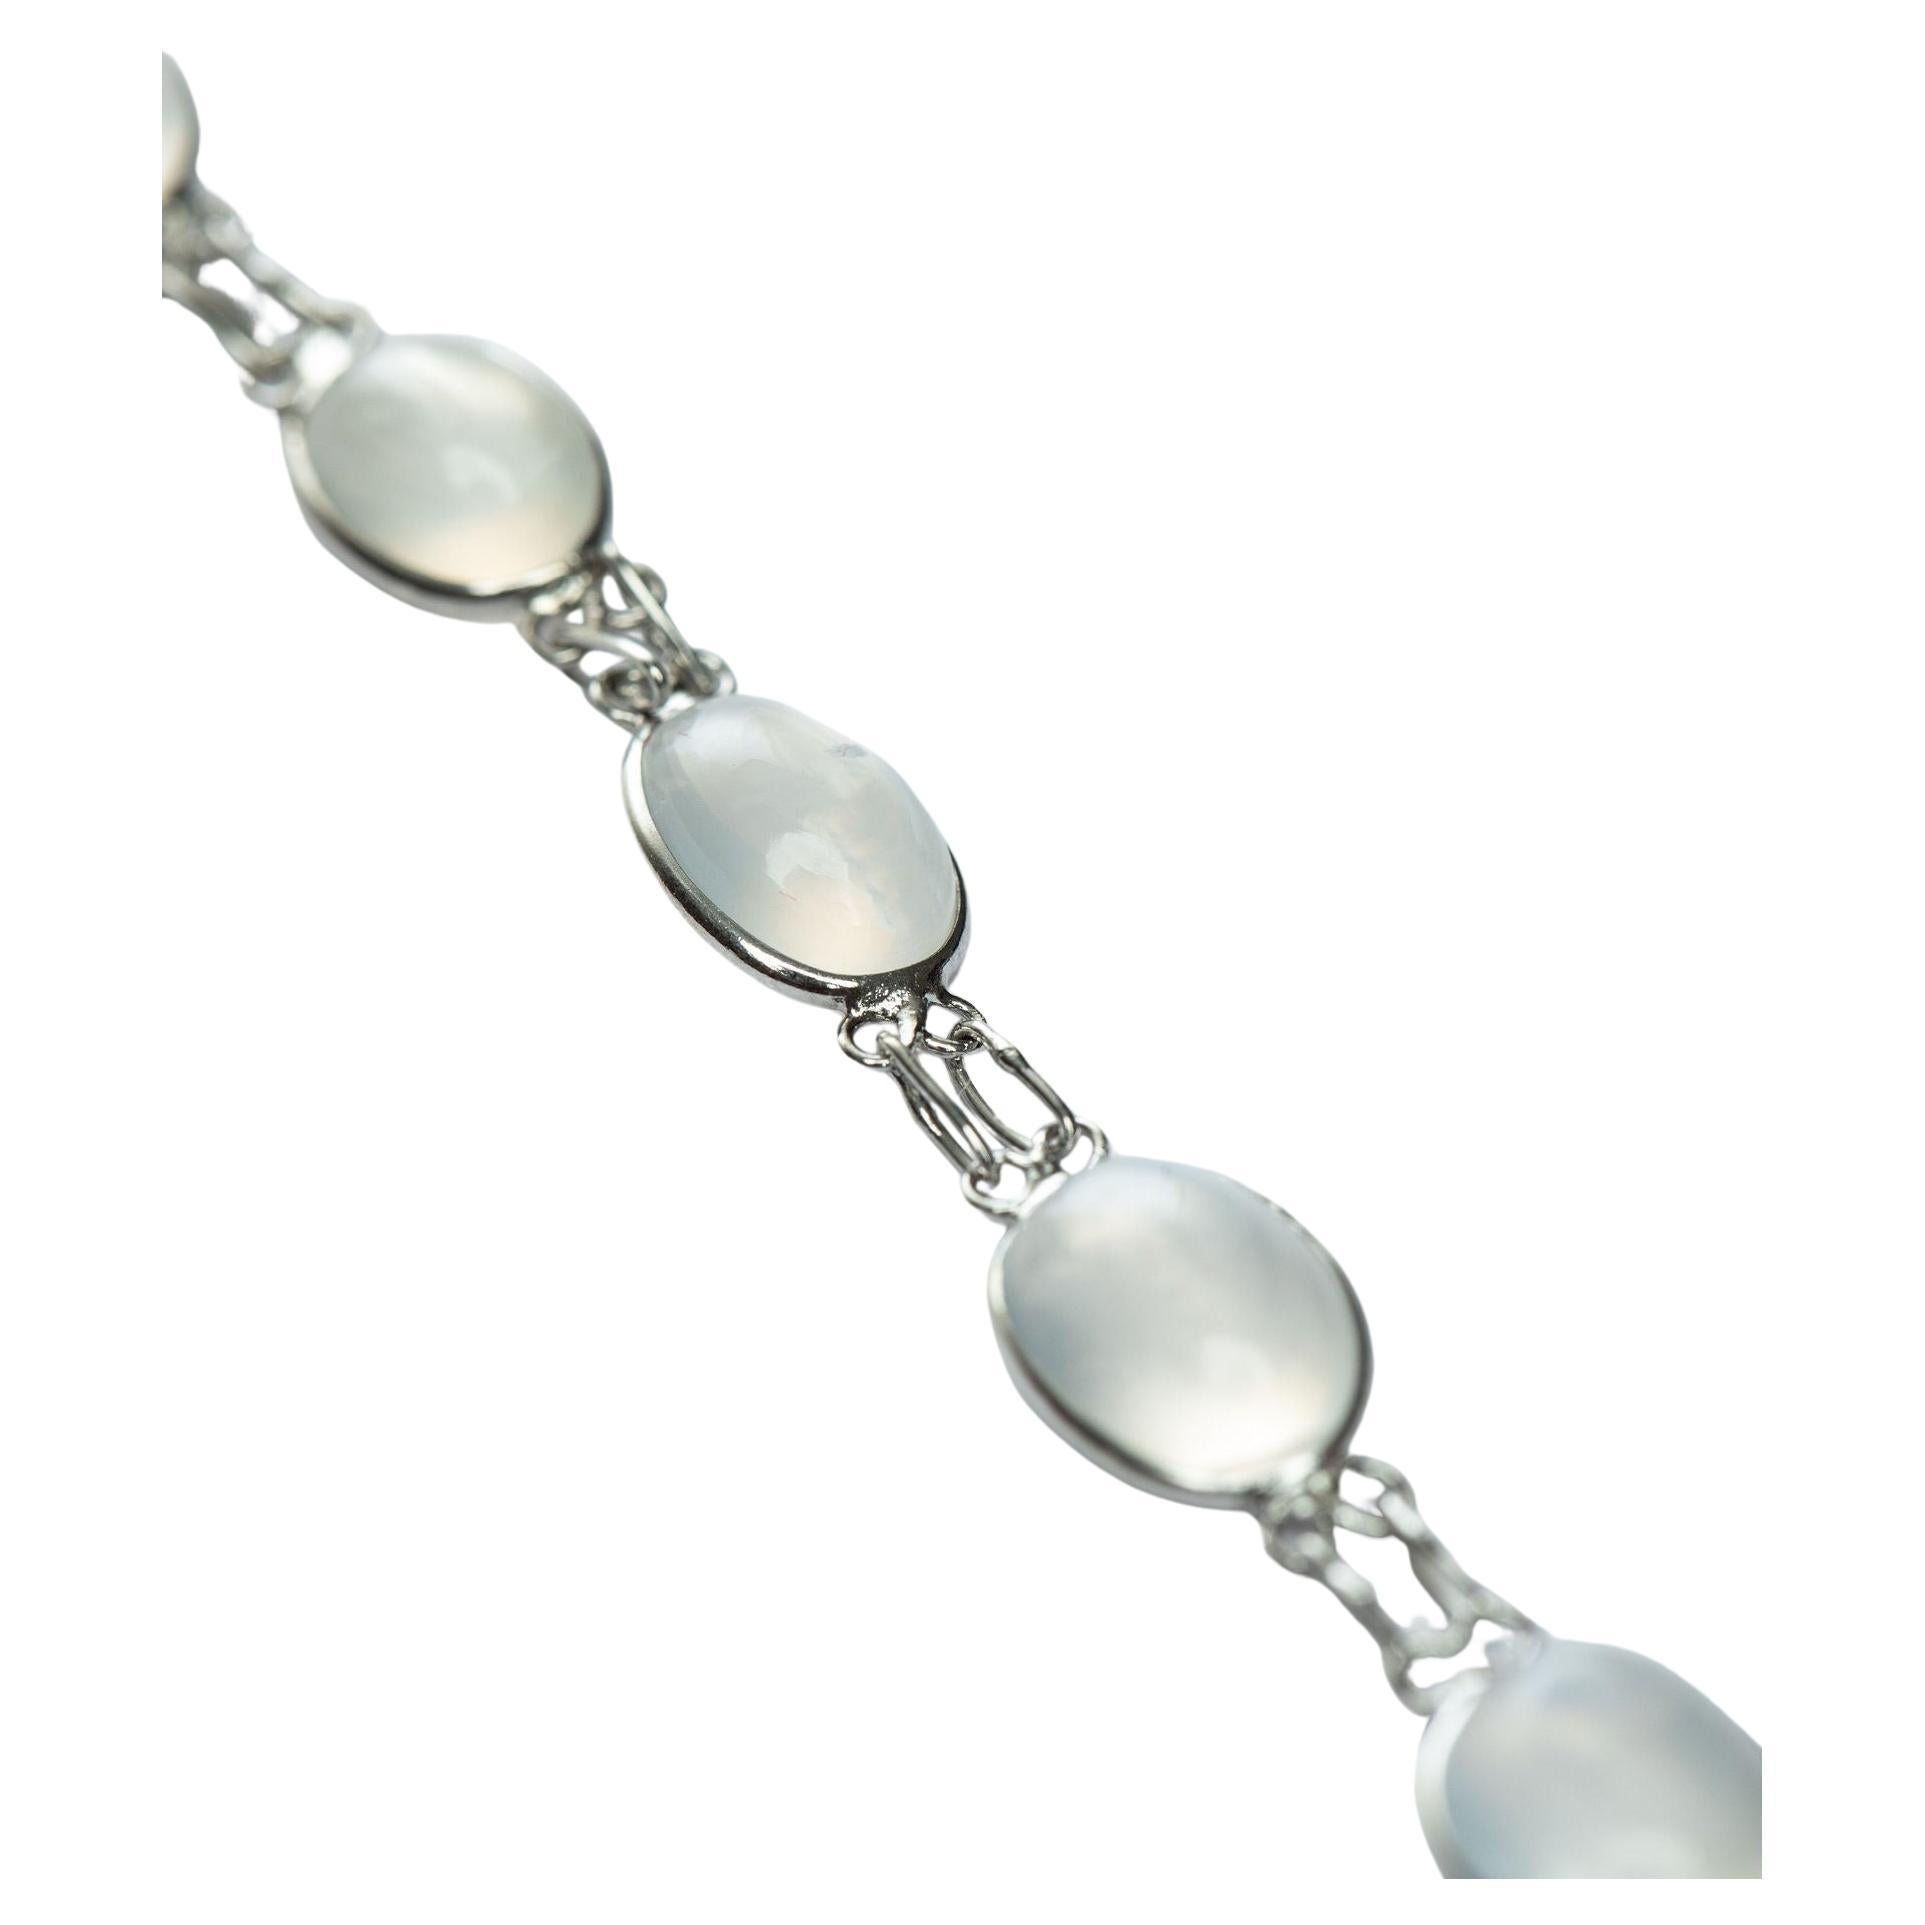  Adorn your wrist with our natural moonstone link bracelet with stunning 12 mixed size stones. Each gemstone is carefully selected for its unique quality and set in a secure setting to create a lasting, mesmerizing piece. Perfect for adding a touch